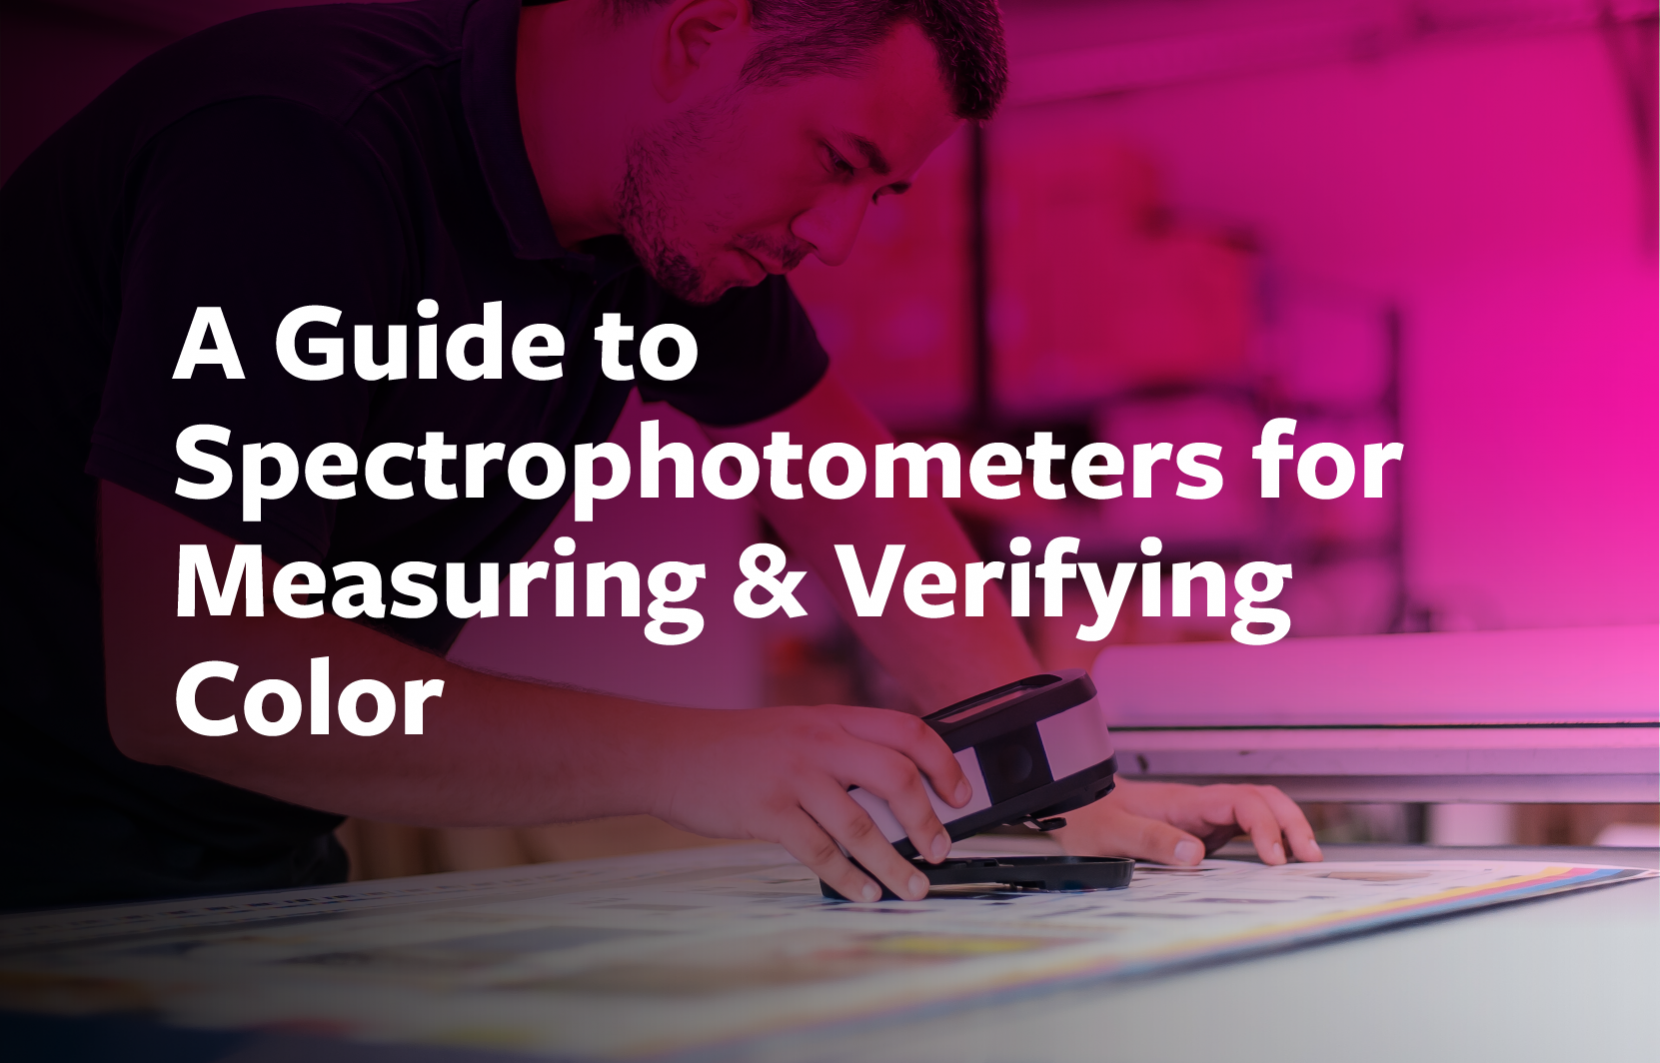 Article-2-Graphic-Guide-to-Spectrophotomers-Article-Header-Nov15-01-1660x1063.png